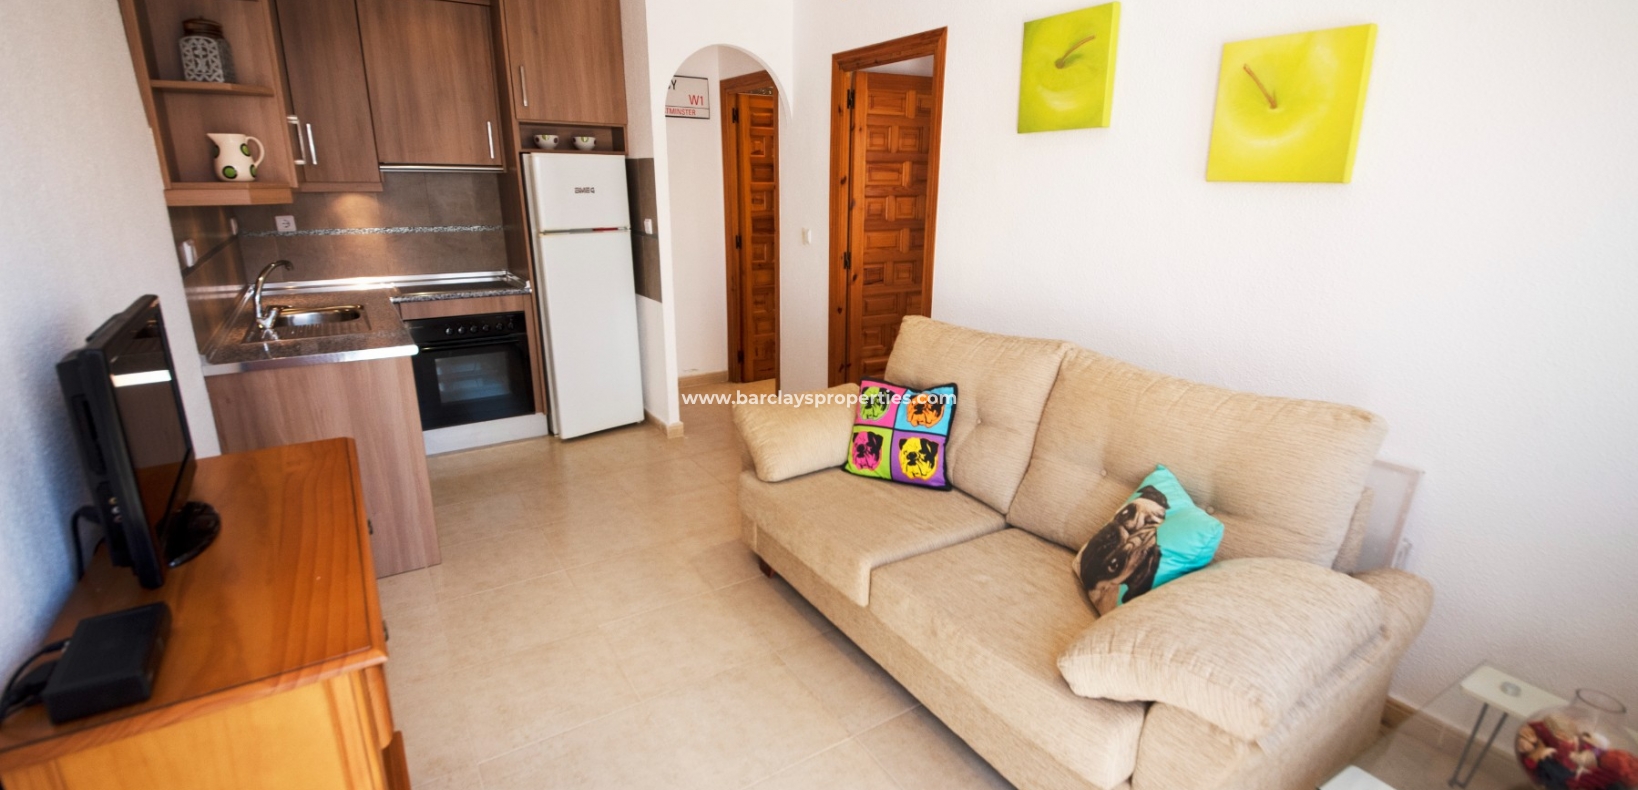 Living Room - South Facing Terraced House For Sale in Alicante, Spain